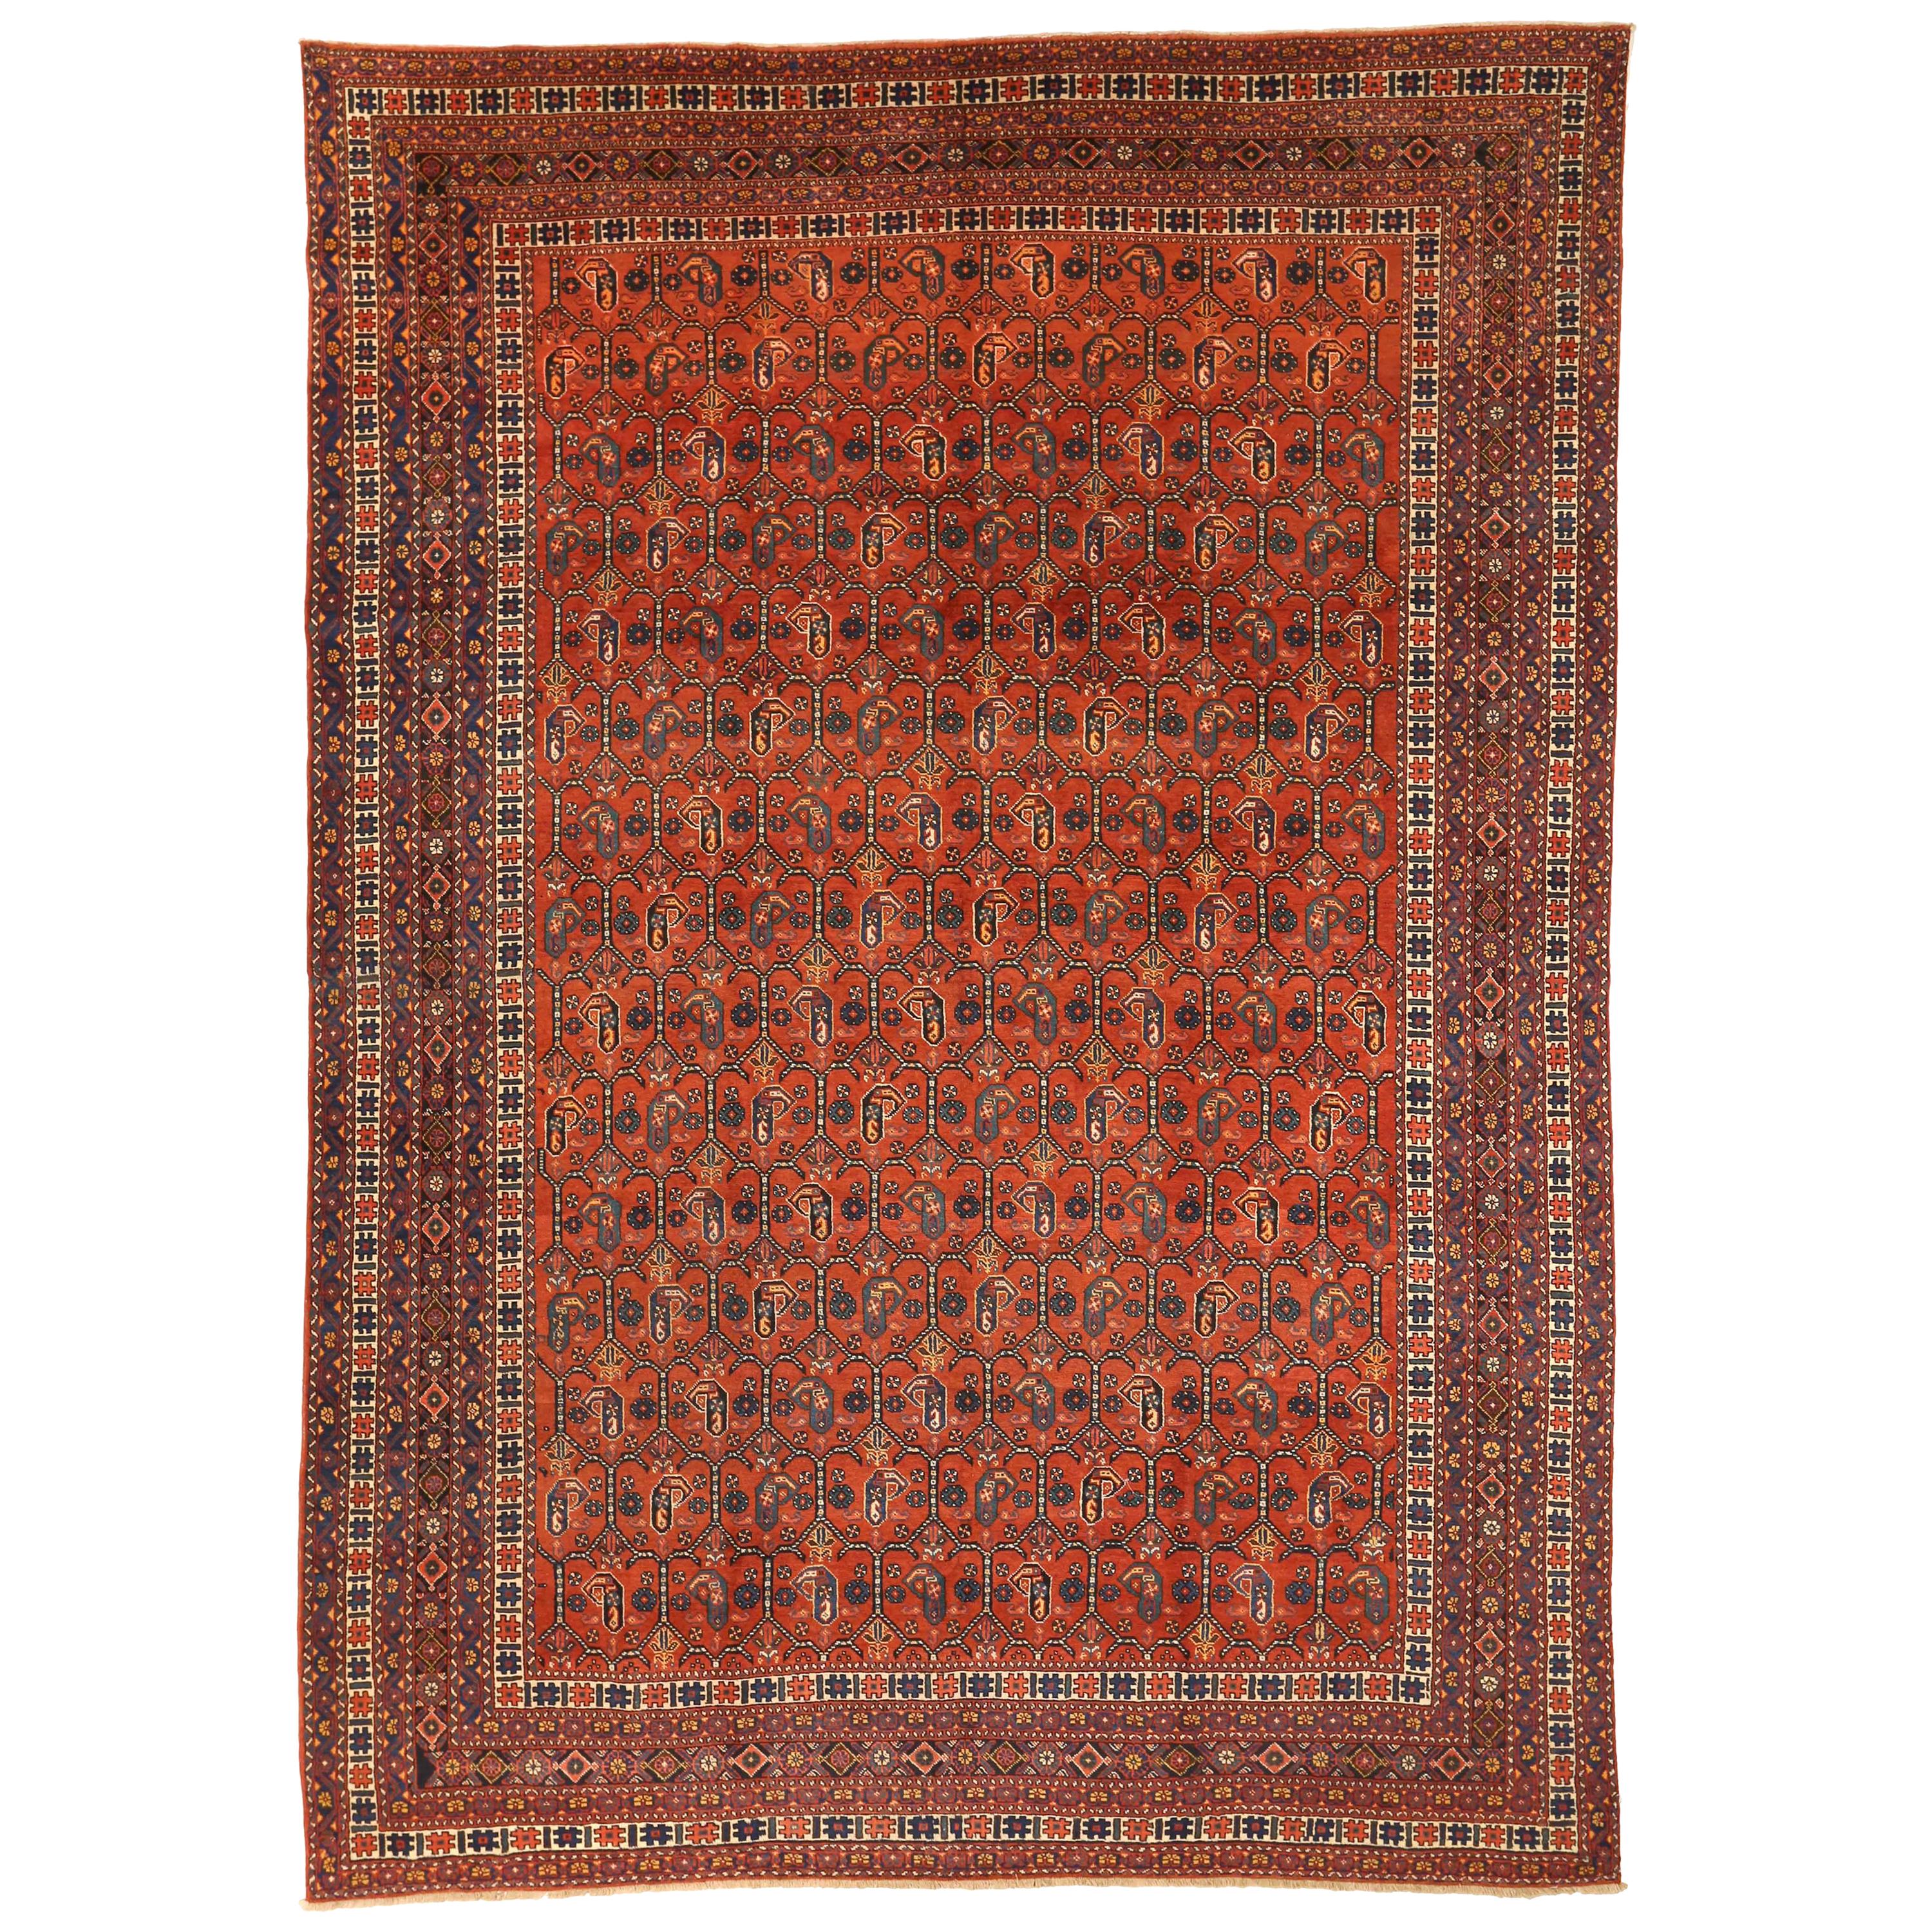 Antique Persian Bakhtiari Rug with Incredible Geometric Details, circa 1940s For Sale